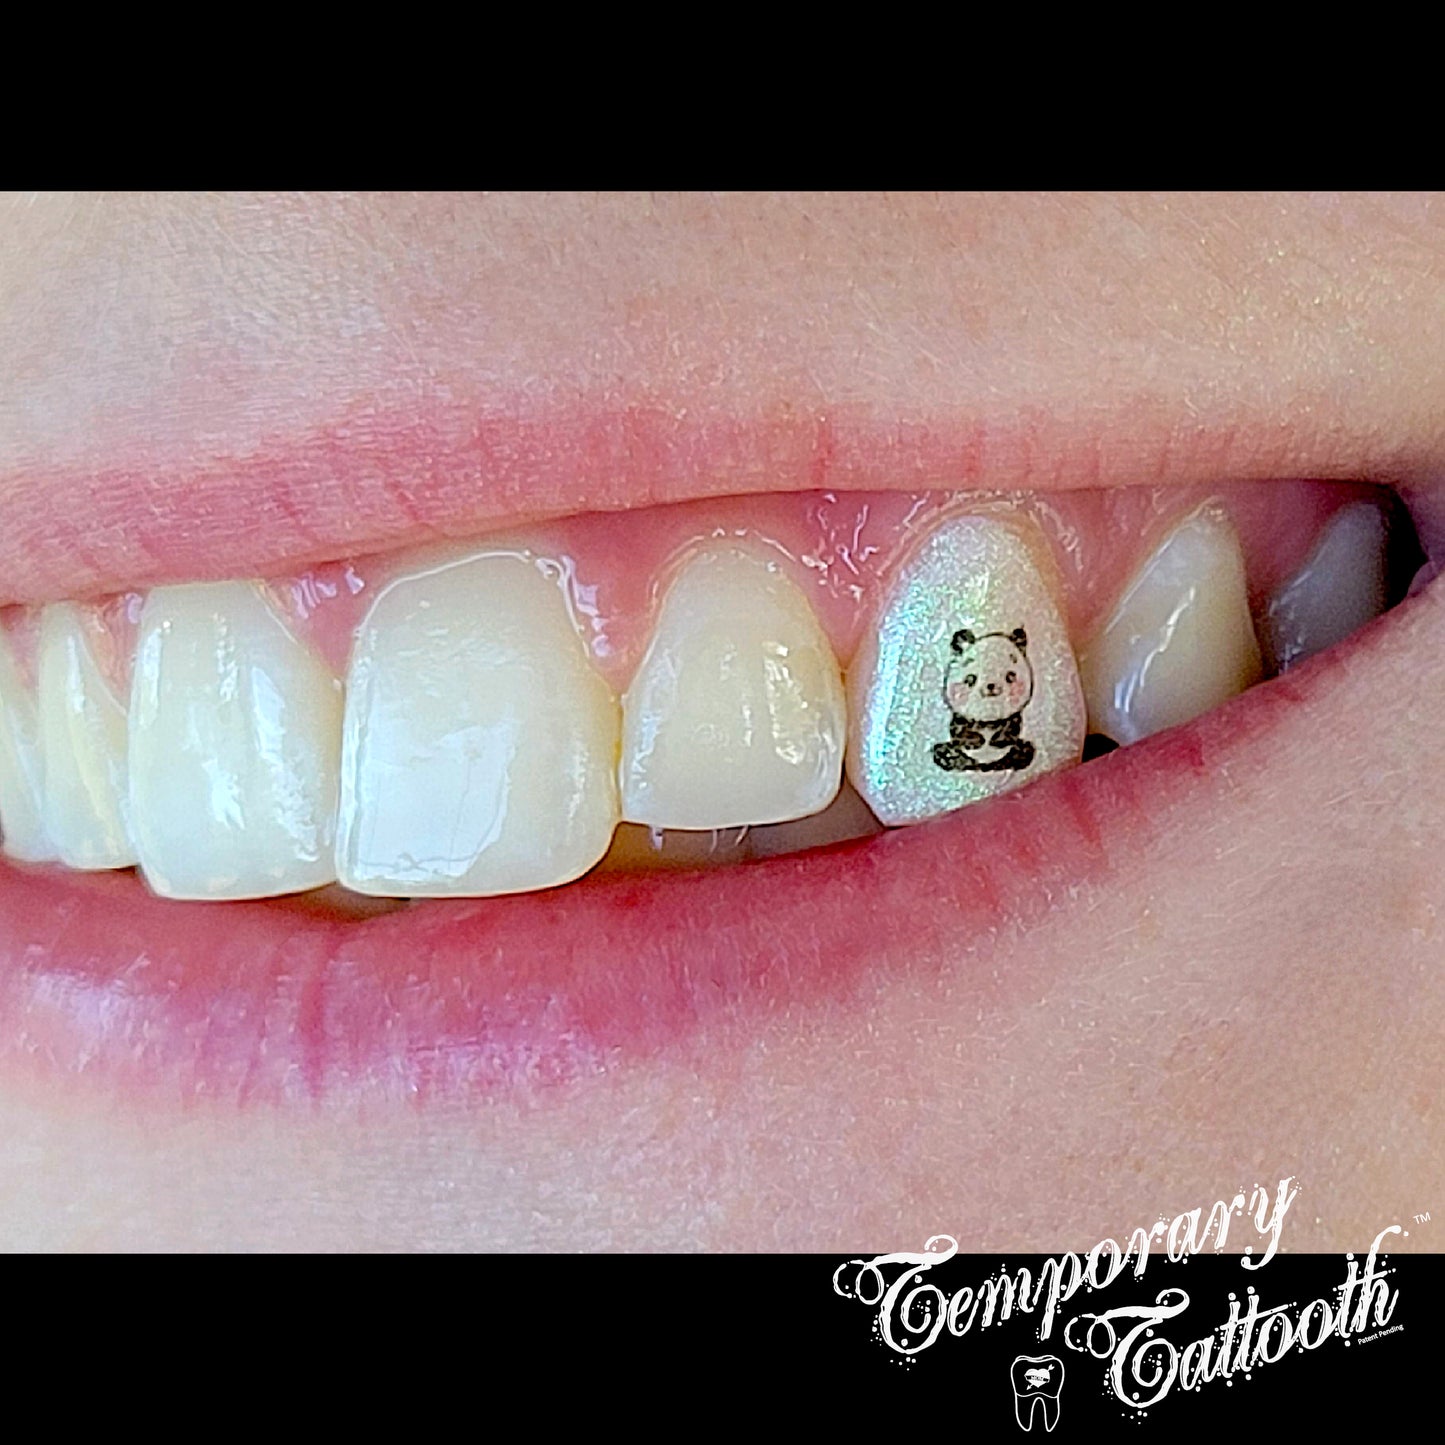 A Pink Lime Galaxy - Iridescent Colorant with no undercoat and a Panda Tooth Tattoo by Temporary Tattooth.